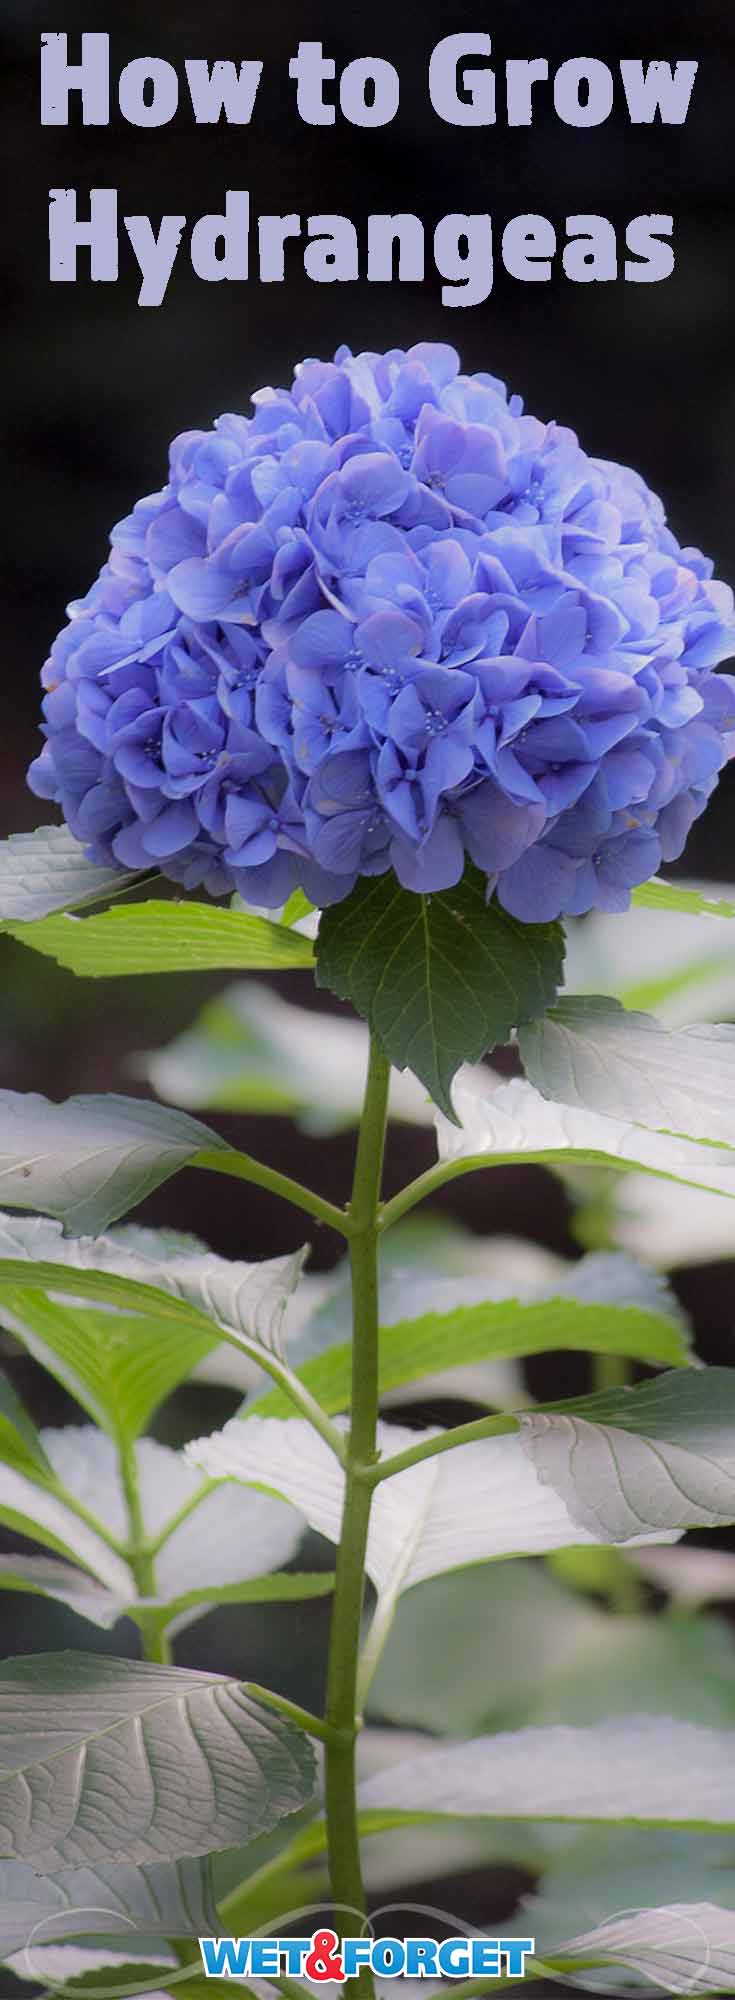 The vivid colors and velvety leaves make hydrangeas one of the most popular flowers. Learn how to grow hydrangeas and take care of them with our top tips and tricks!